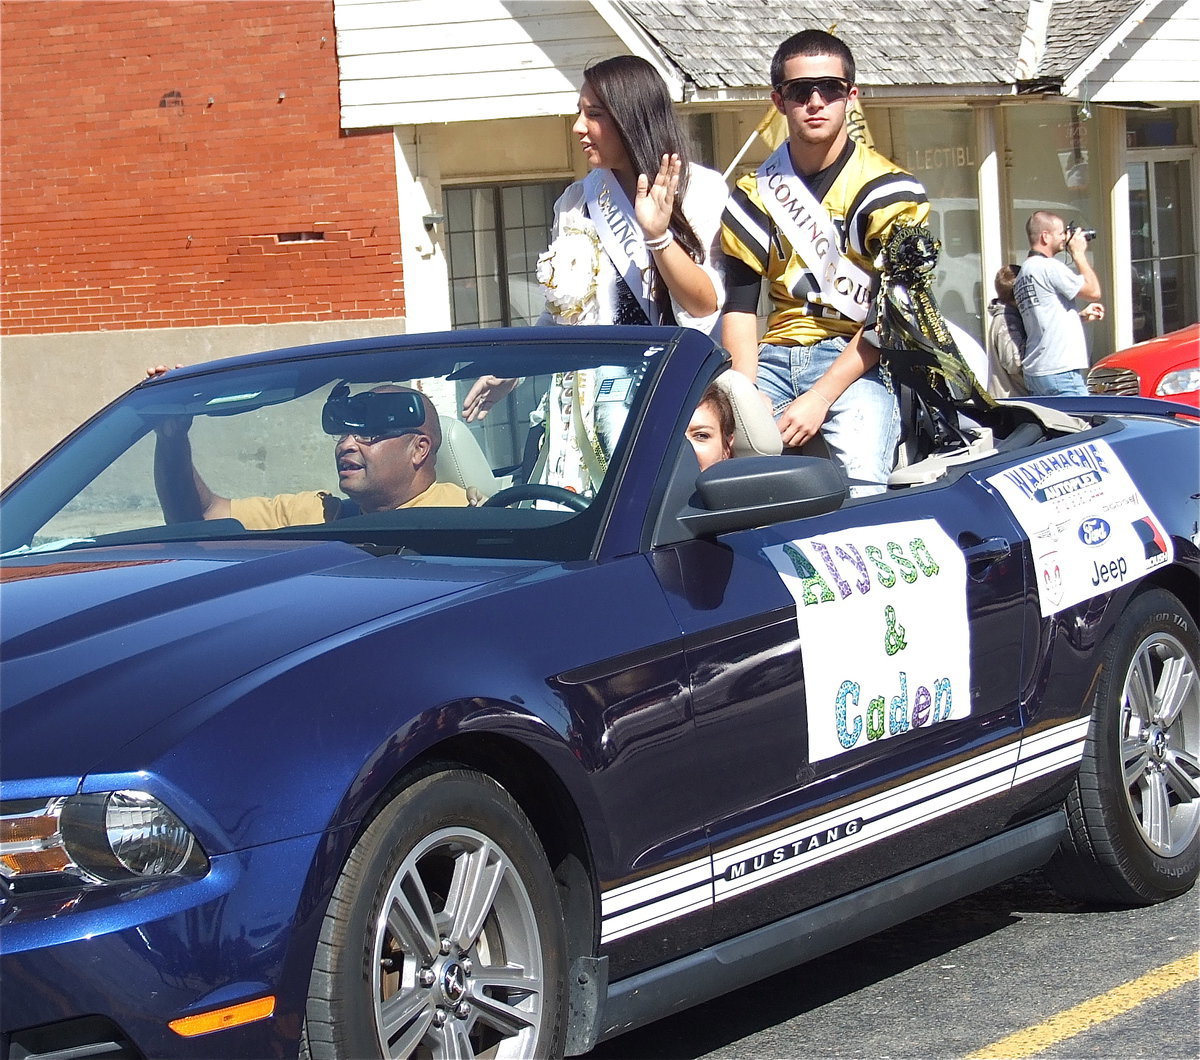 Image: 2012 Homecoming Queen nominee Alyssa Richards and Homecoming King nominee Caden Jacinto(6) are escorted down the parade path by Tina Richards (mom) and Larry Mayberry, Sr.